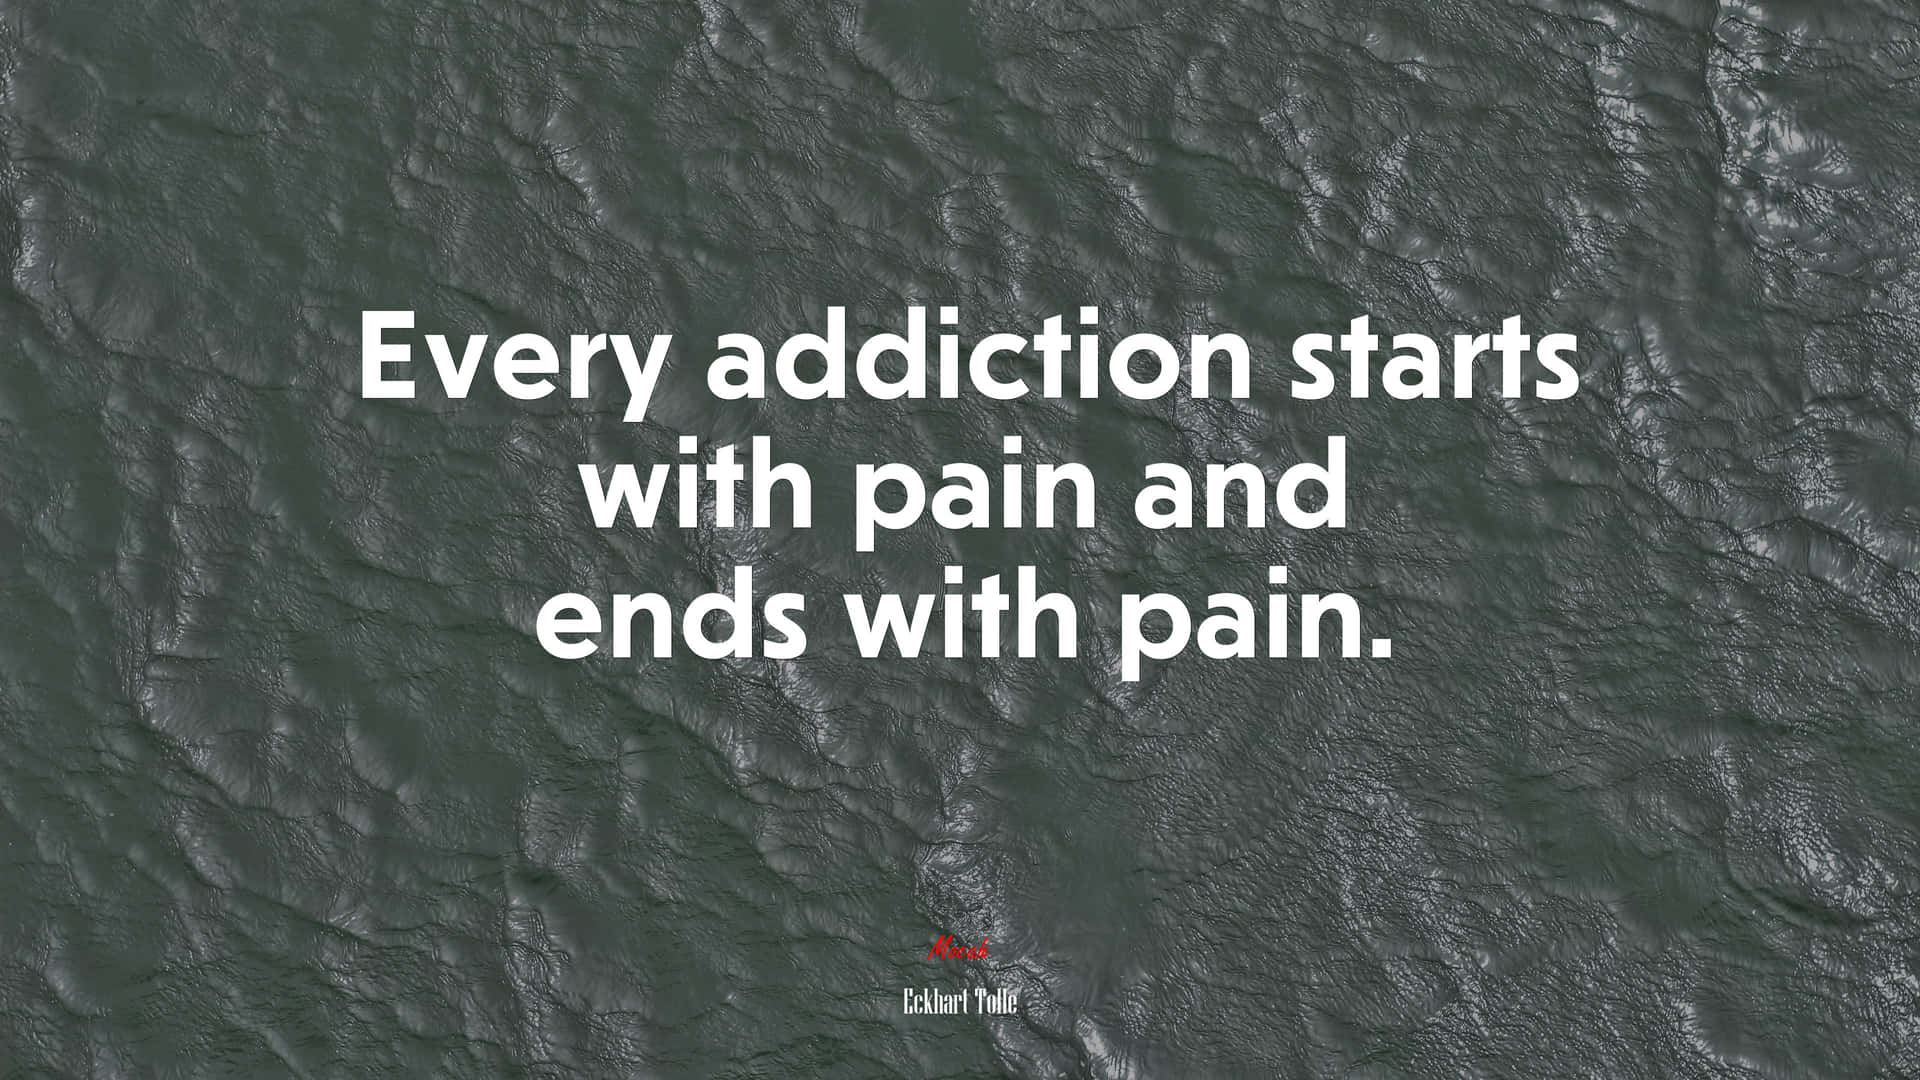 Addition With Pain Quote Wallpaper